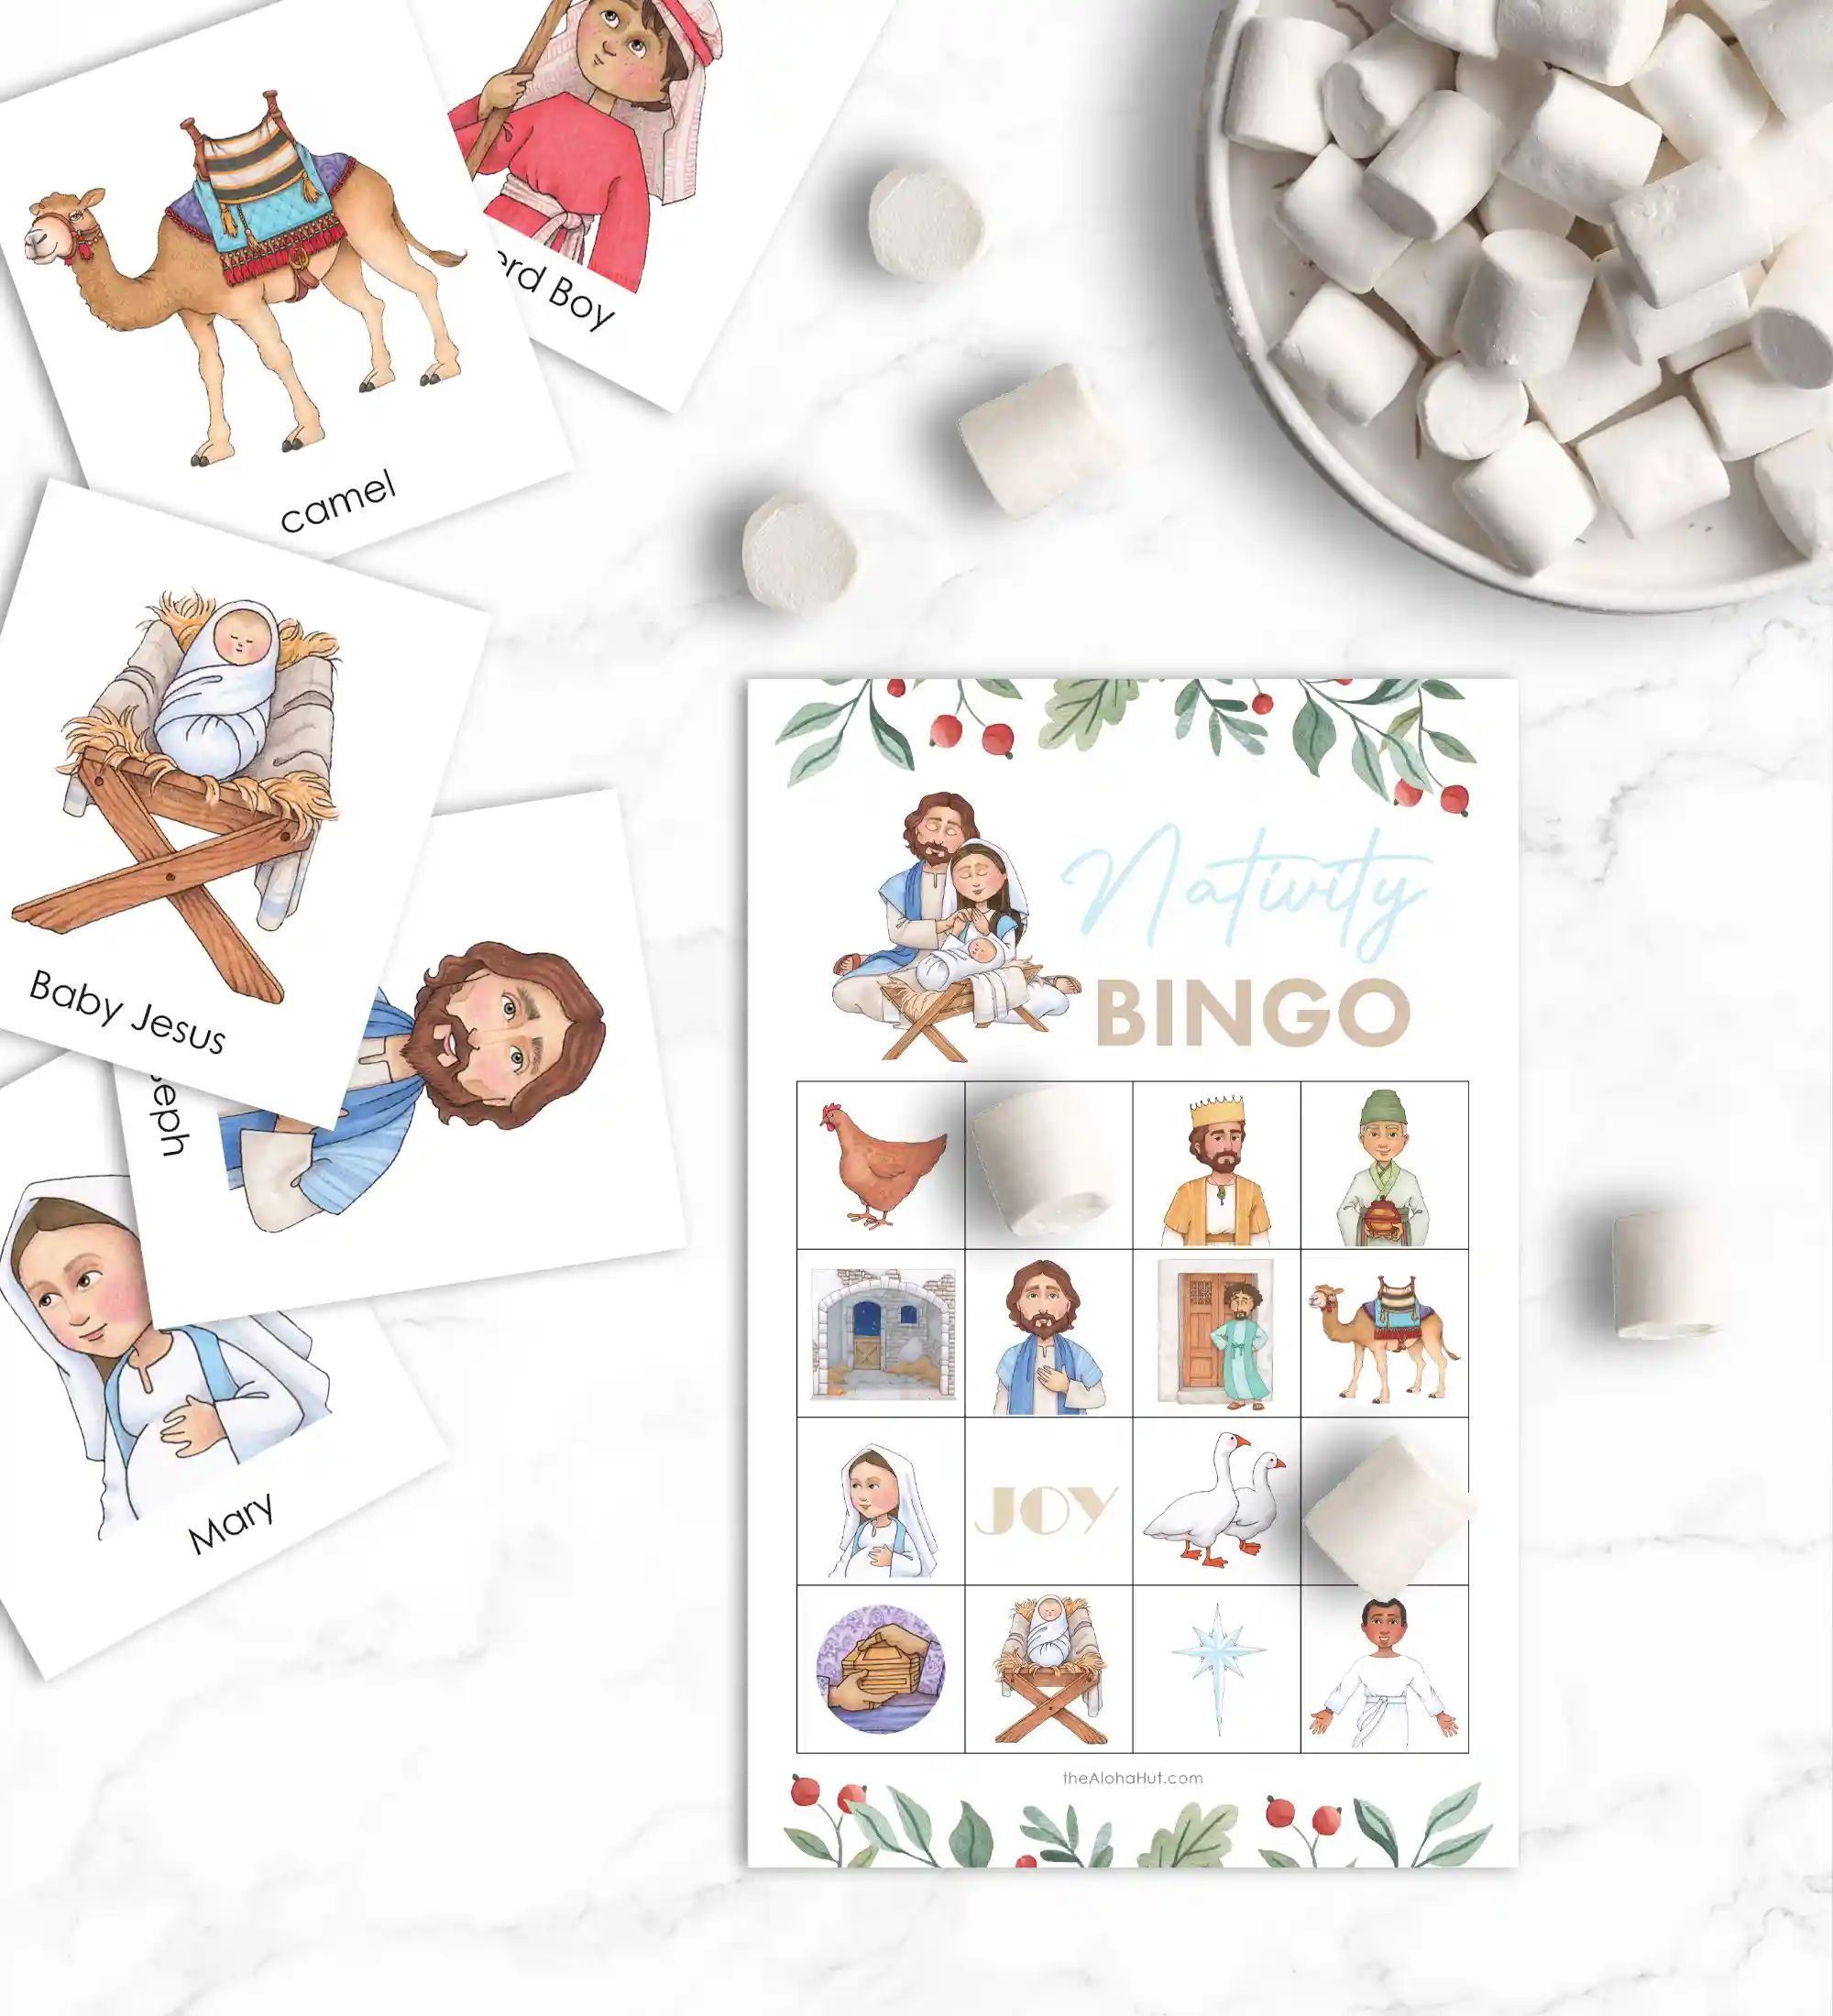 Christmas Natvity BINGO game. Download the printable Christmas BINGO game that has all the nativity characters and add it to your Christmas bucket list.